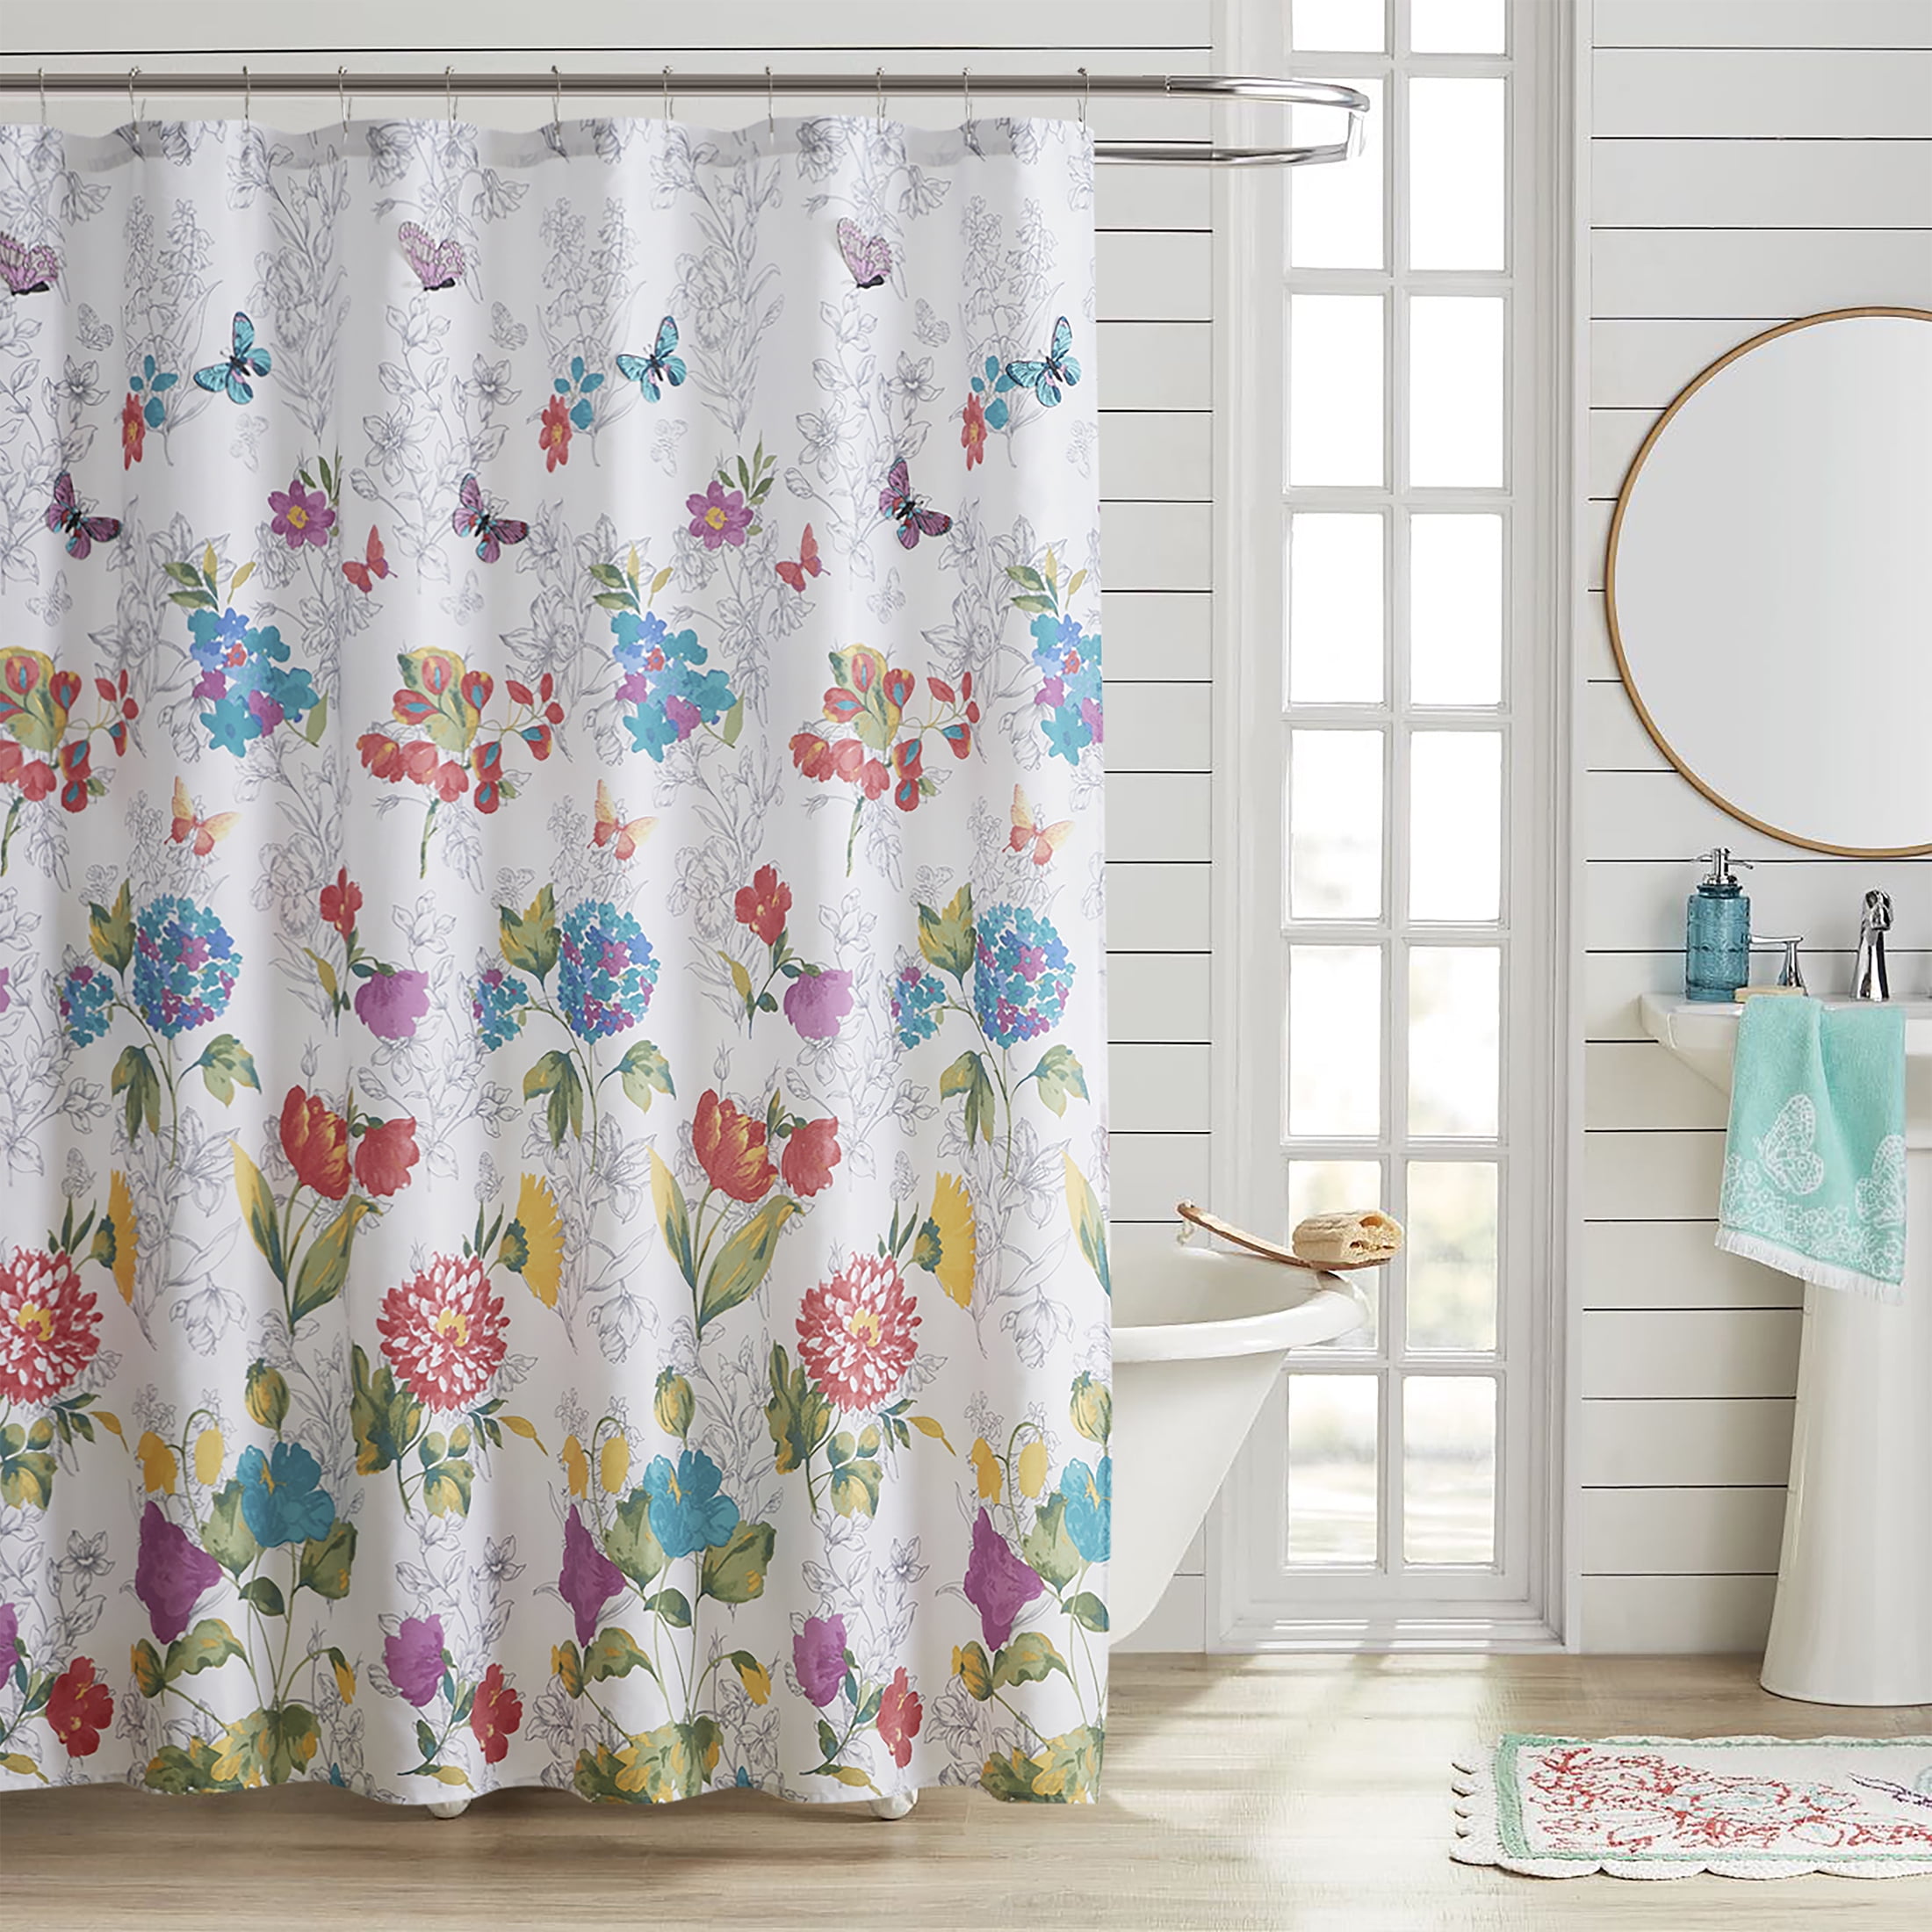 Butterfly Shower Curtain Beautiful Multi Colors On White NEW 